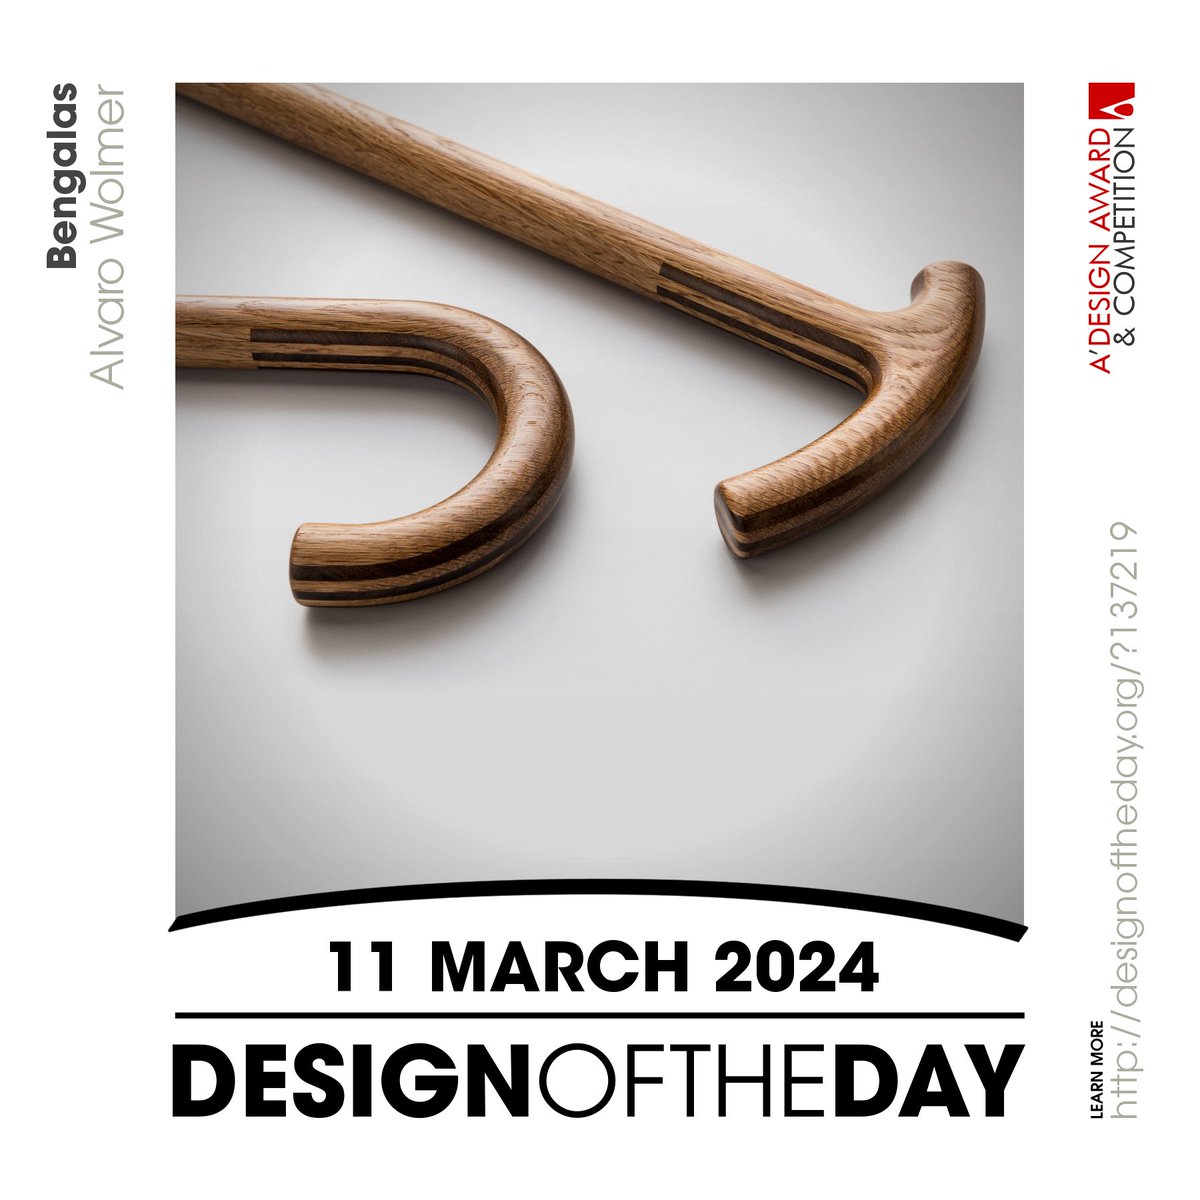 Congrats to Alvaro Wolmer, the creator behind the Design of the Day of 11 March 2024 - Bengalas Walking Sticks. Check out this great work now. We are currently featuring it at designoftheday.org/?137219 #adesignaward #adesigncompetition #designoftheday